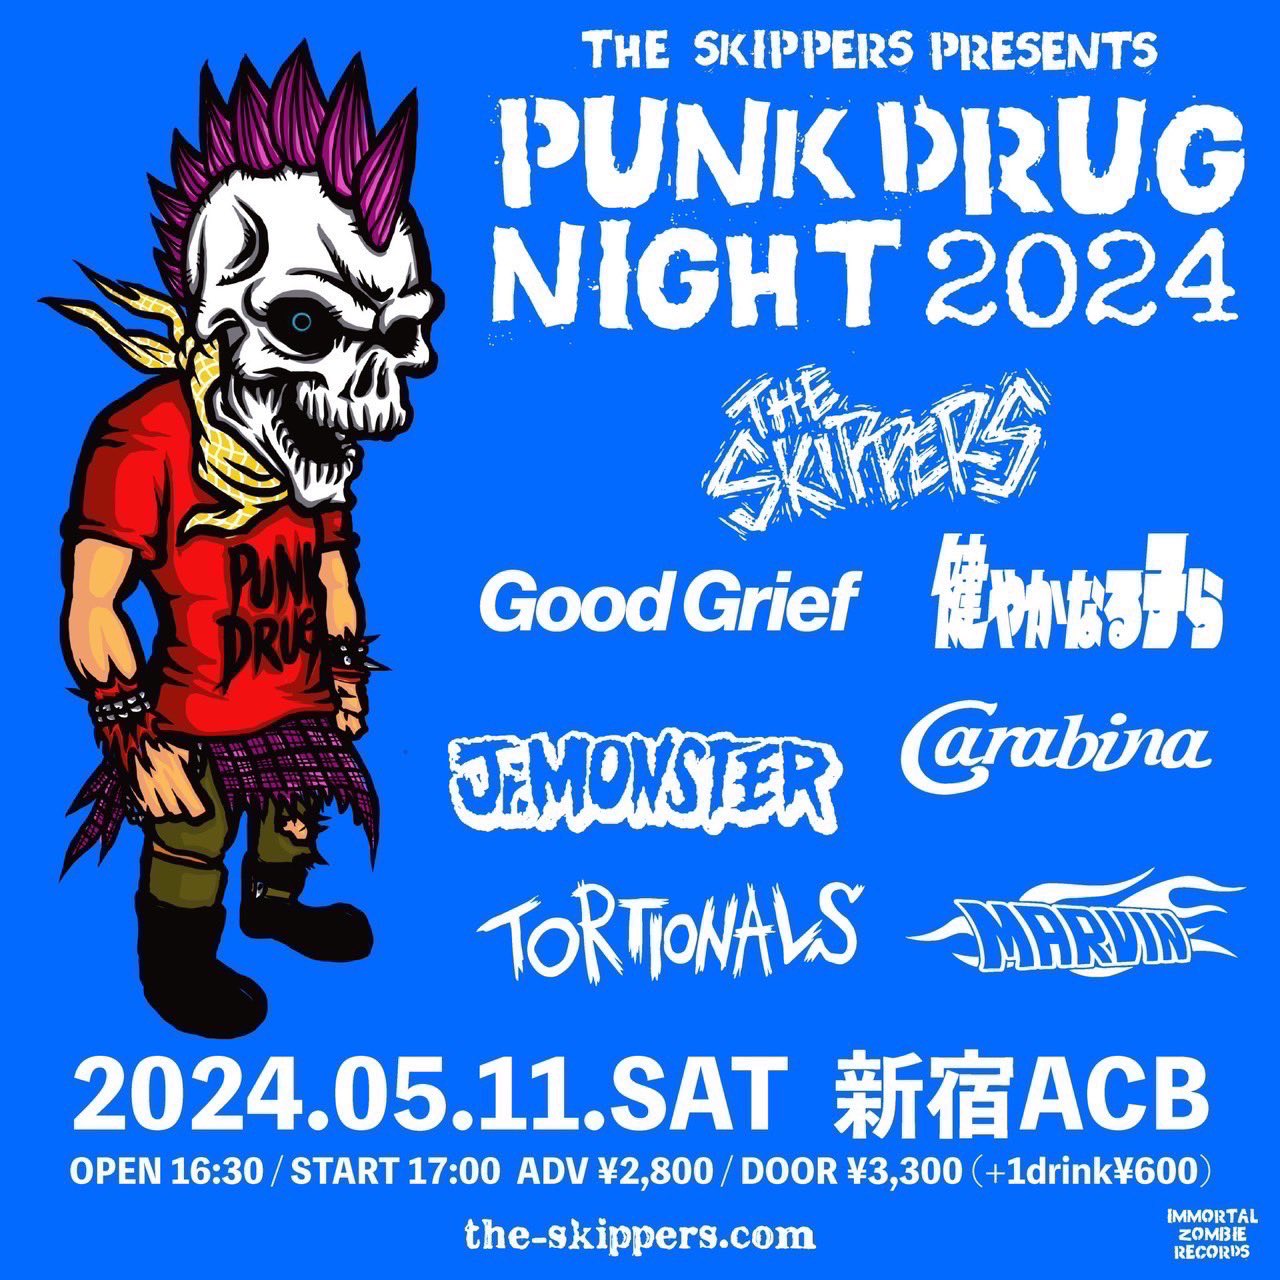 THE SKIPPERS Presents<br>“PUNK DRUG NIGHT 2024”